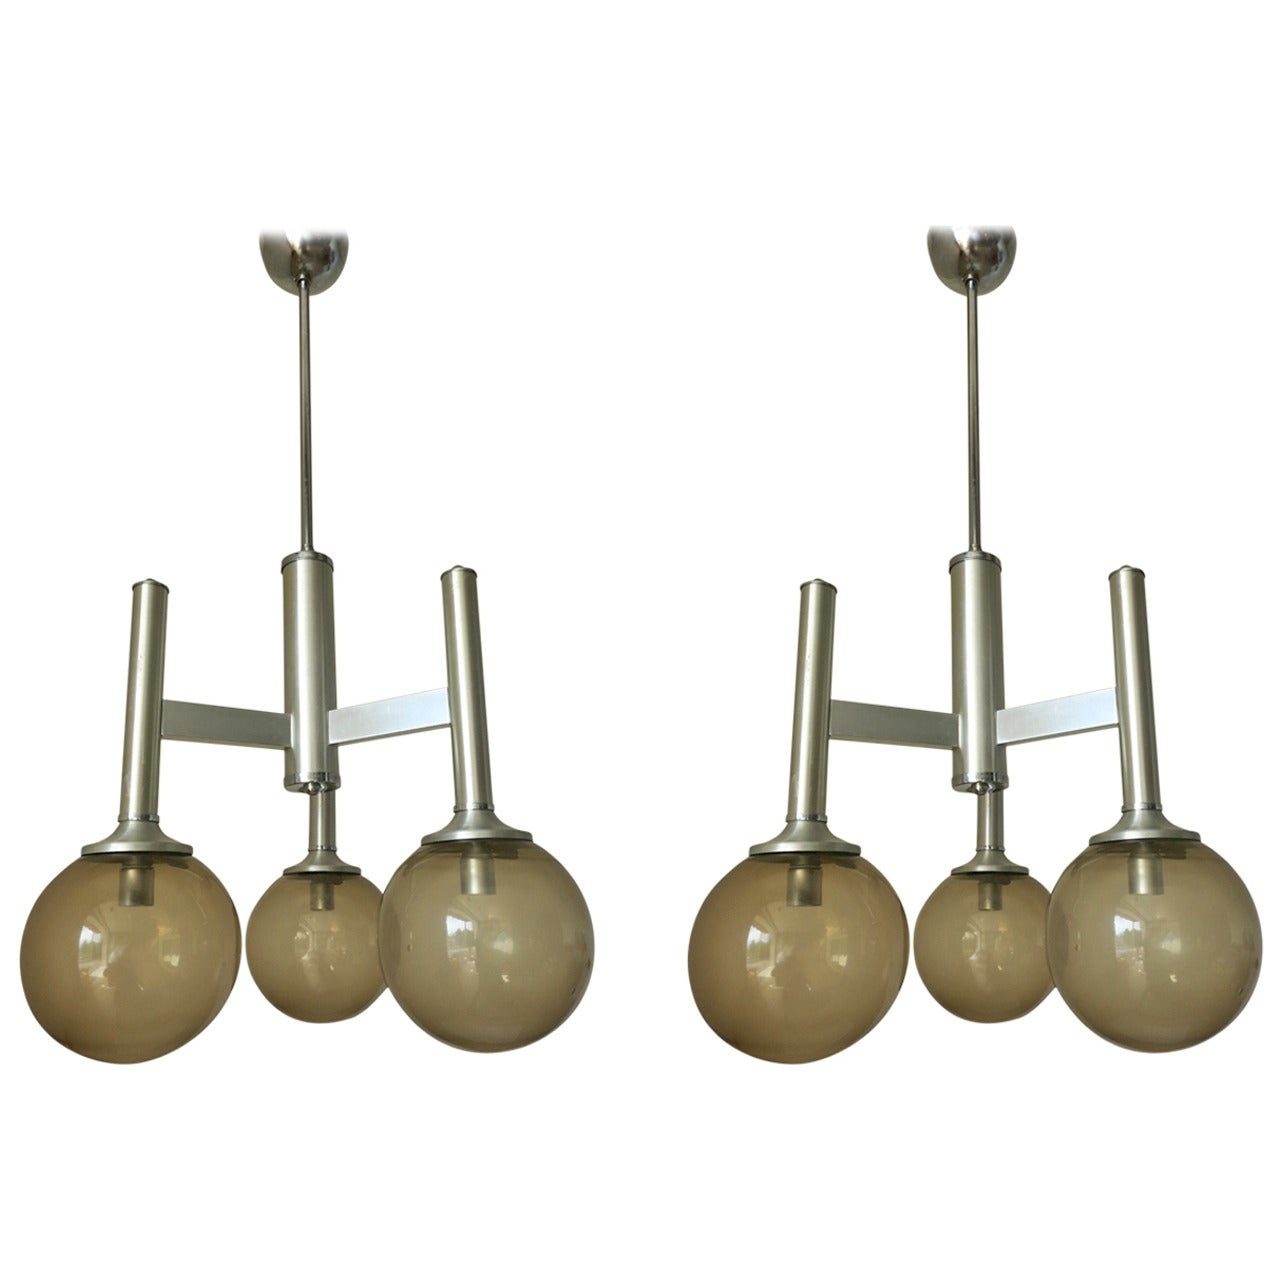 Pair of Vintage Smoky Glass Balls Chandeliers